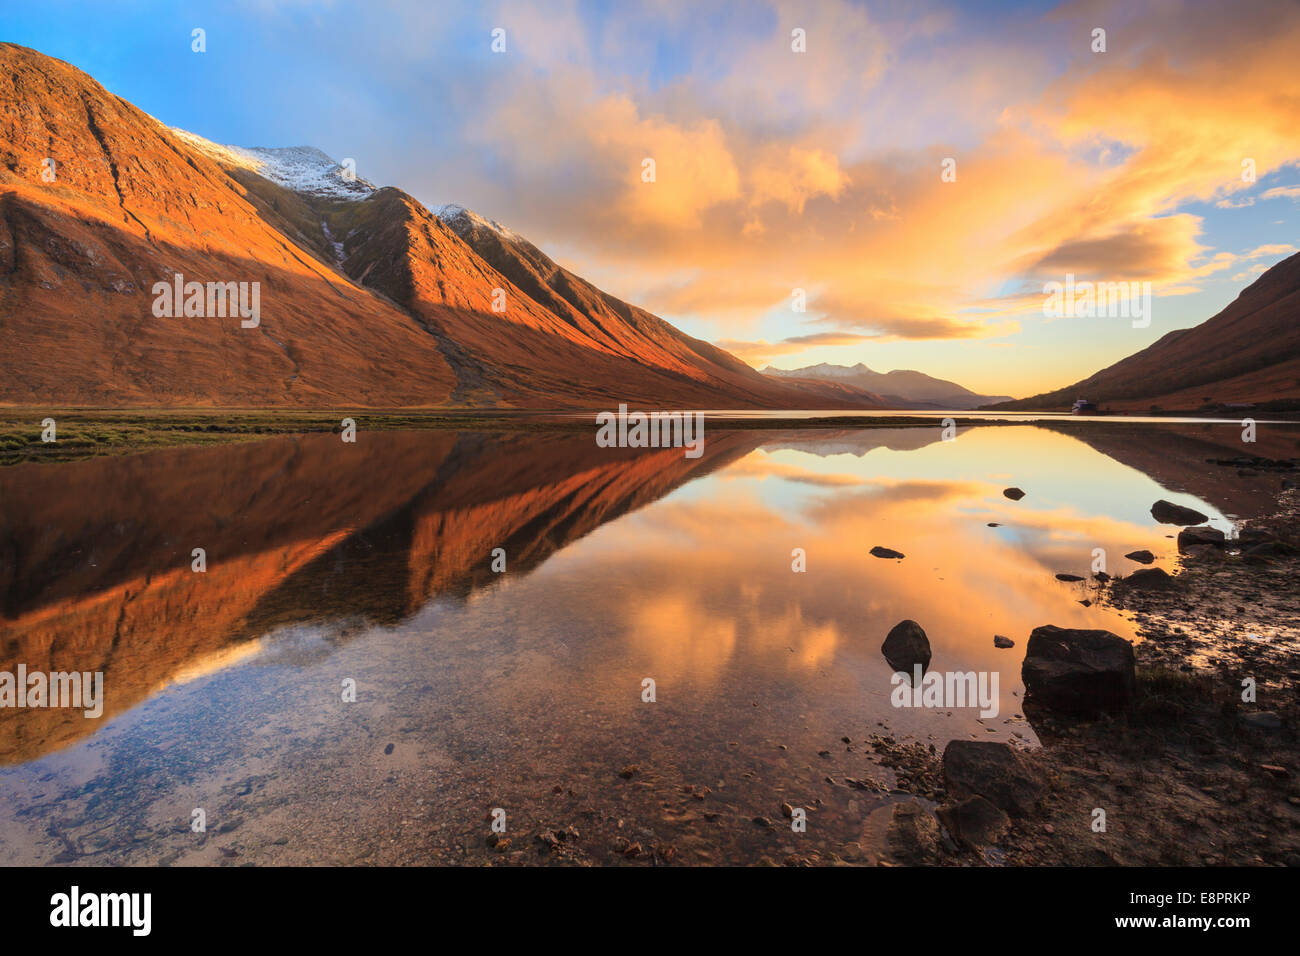 Loch Etive in the Scottish Highlands captured at sunset. Stock Photo